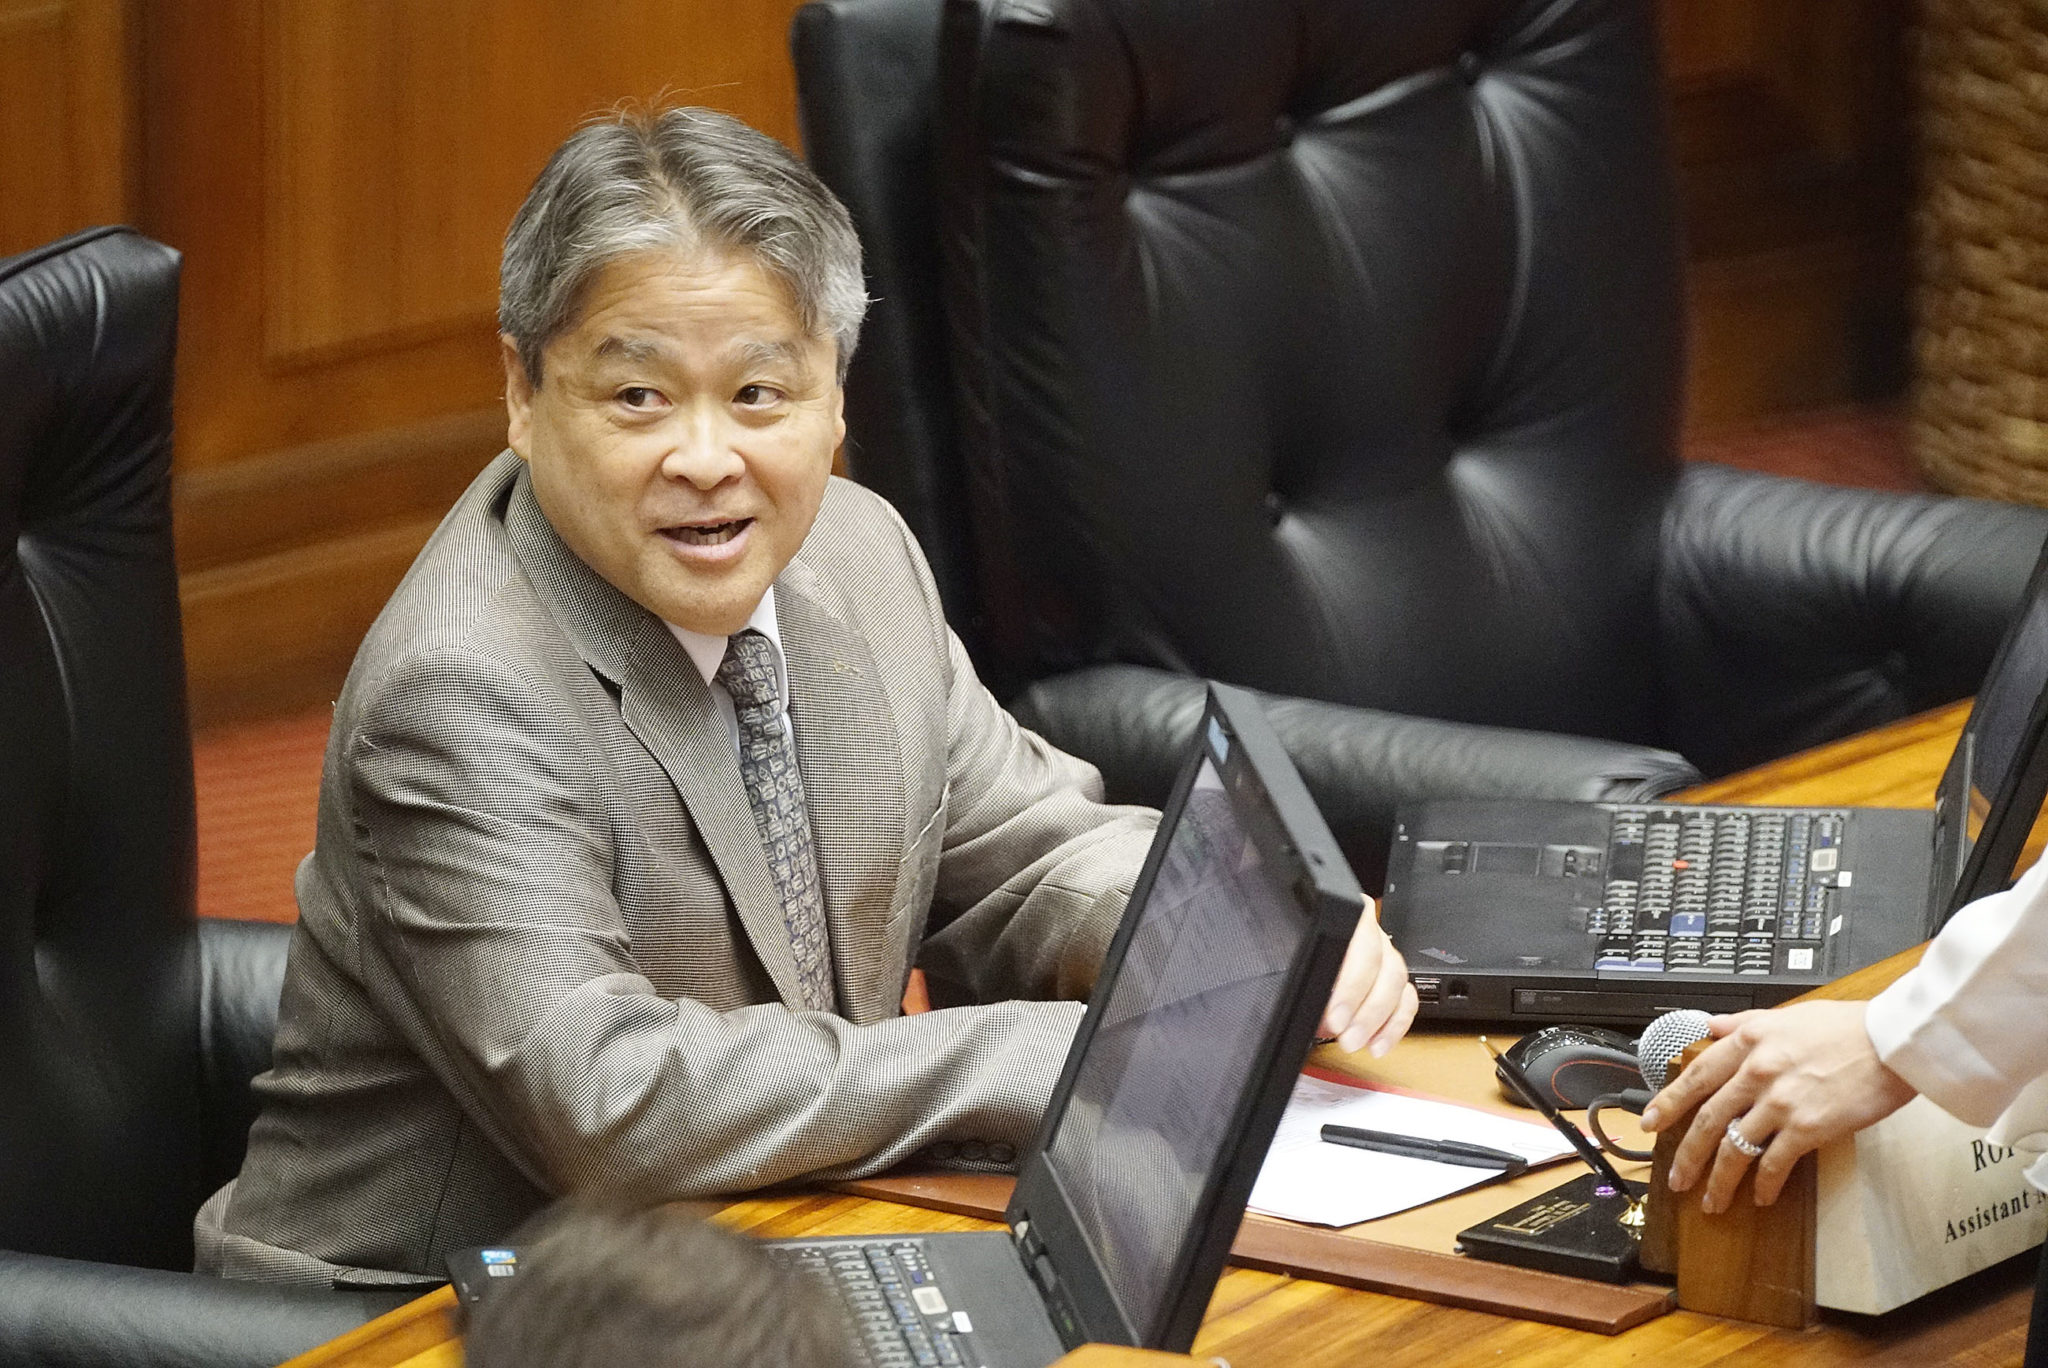 Representative Roy Takumi before 12pm session is convenened. 13 march 2017